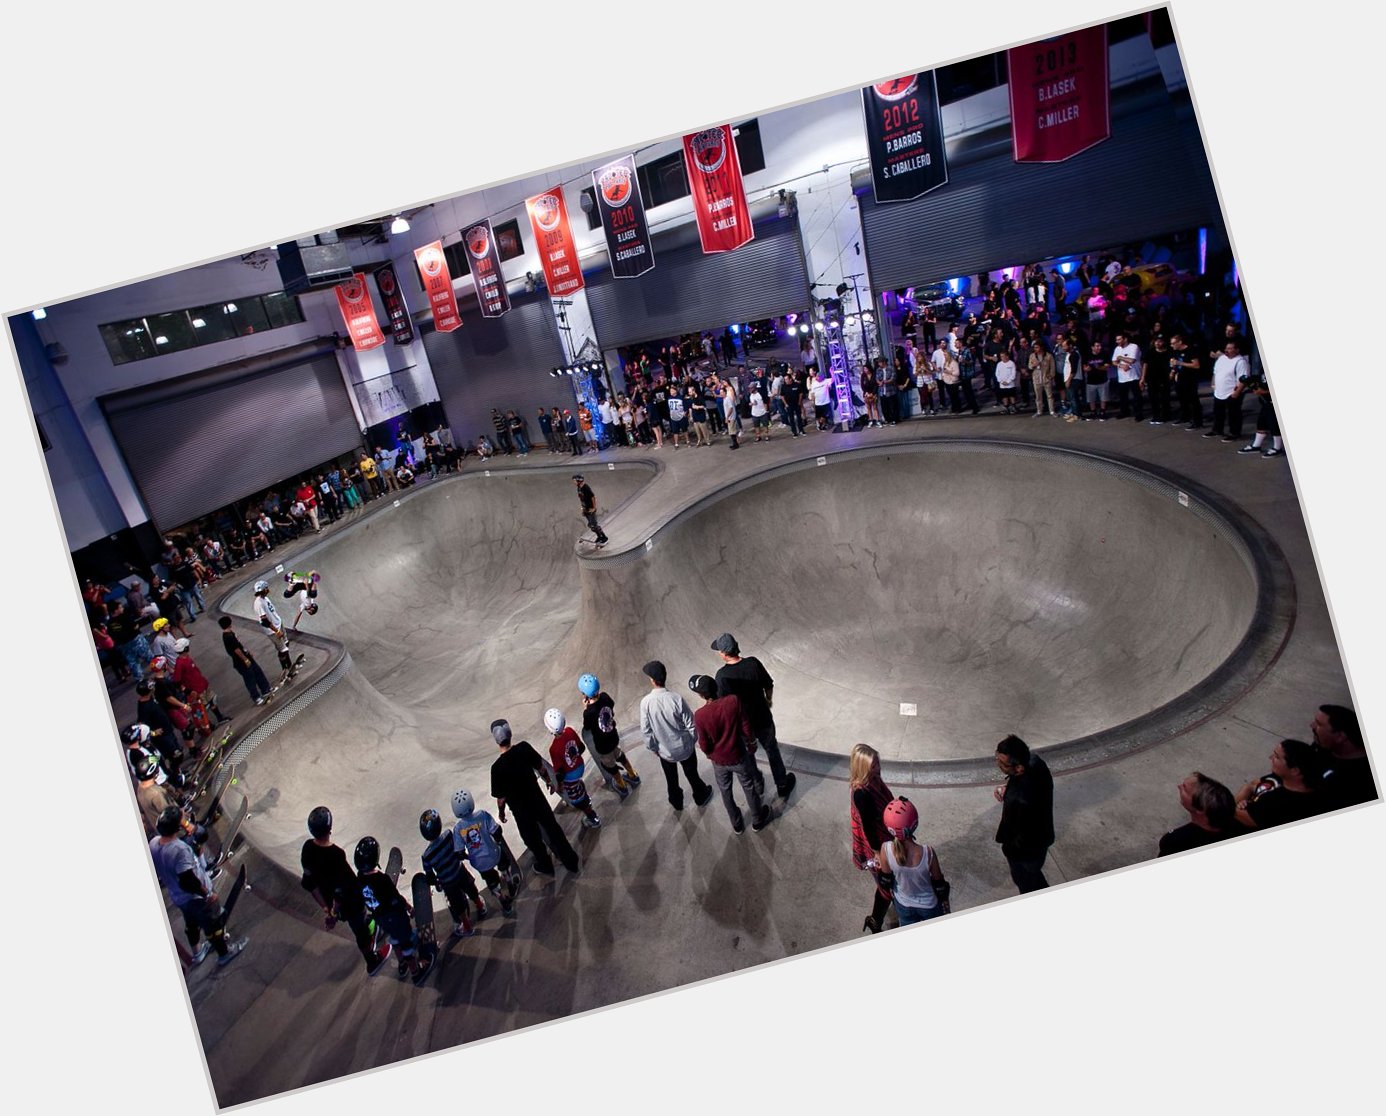 "Steve Caballero turned 50 this weekend.

So, Vans celebrated with a SICK skate session »  